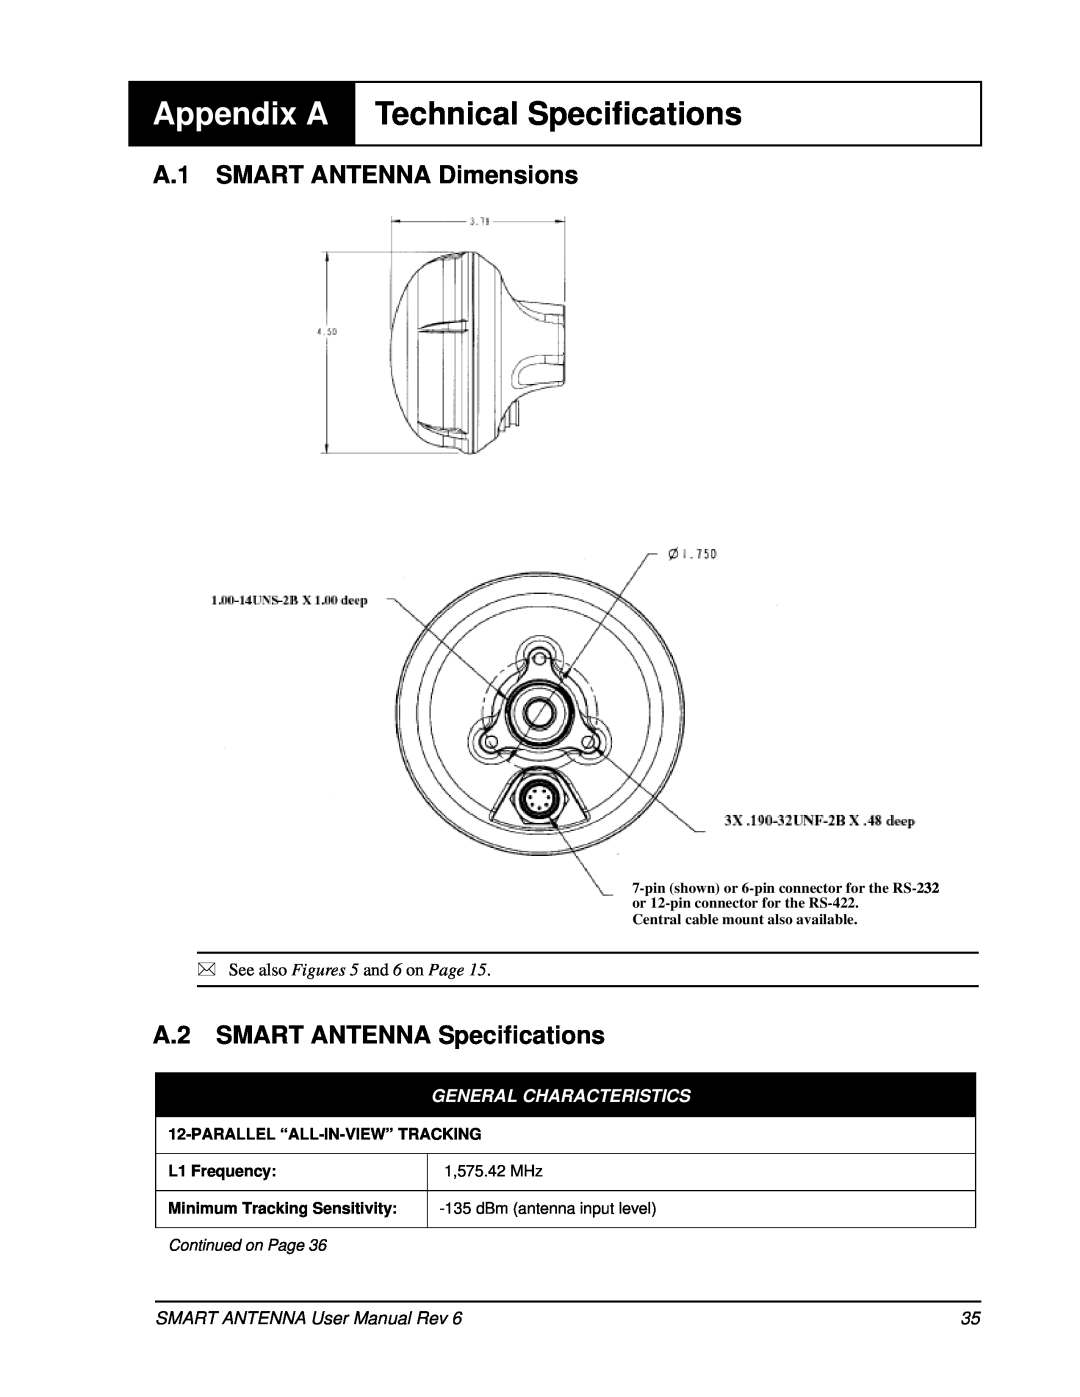 Novatel user manual Appendix A, Technical Specifications, A.1 SMART ANTENNA Dimensions, A.2 SMART ANTENNA Specifications 